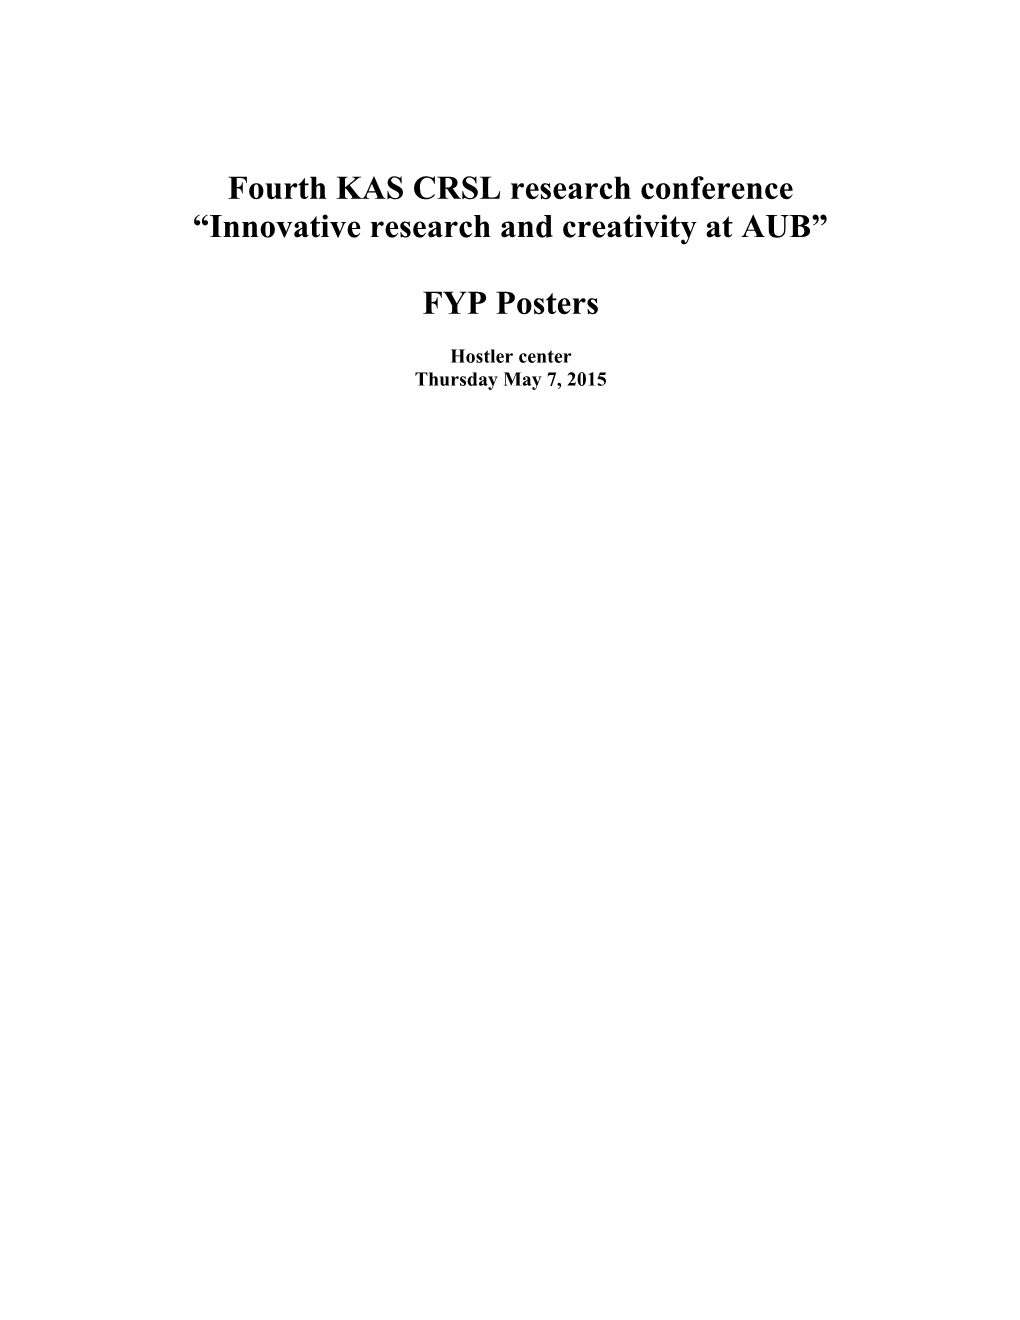 Fourth KAS CRSL Research Conference